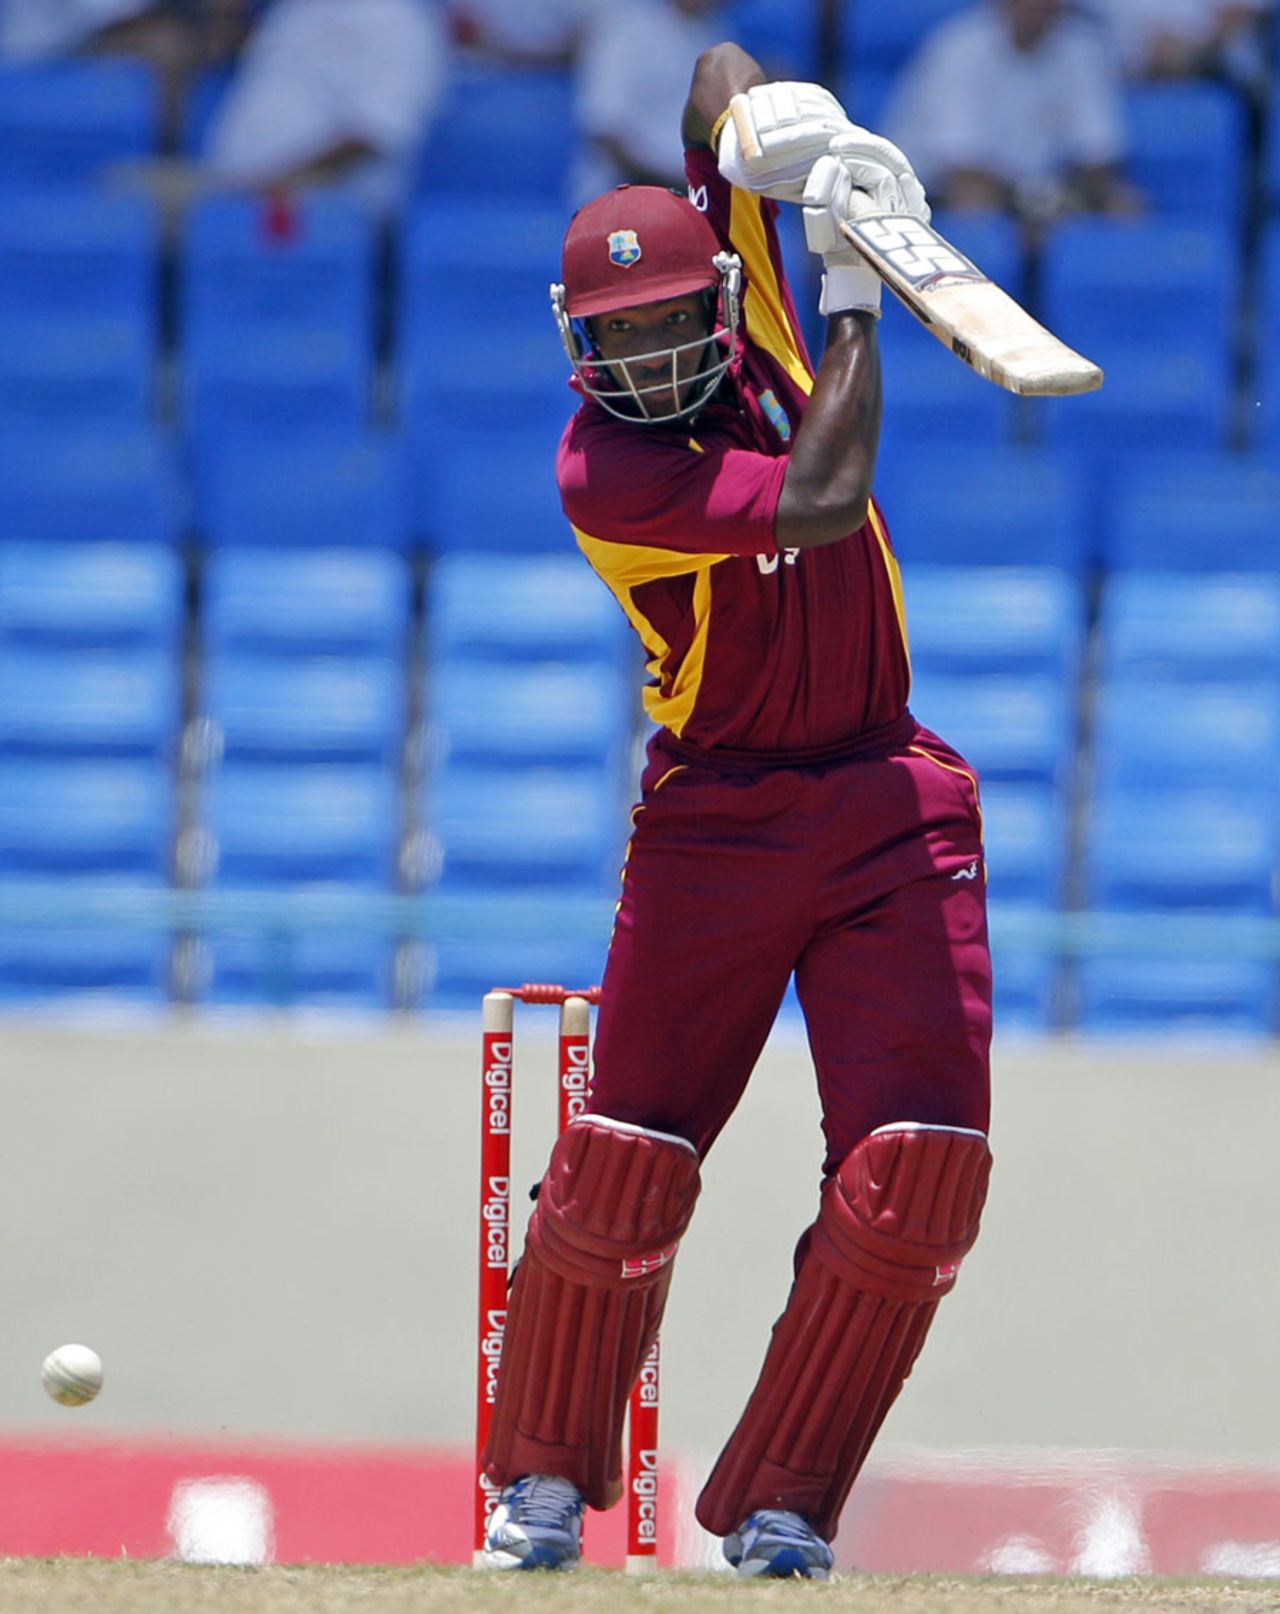 Andre Russell drives on the off side, West Indies v India, 3rd ODI, Antigua, June 11, 2011